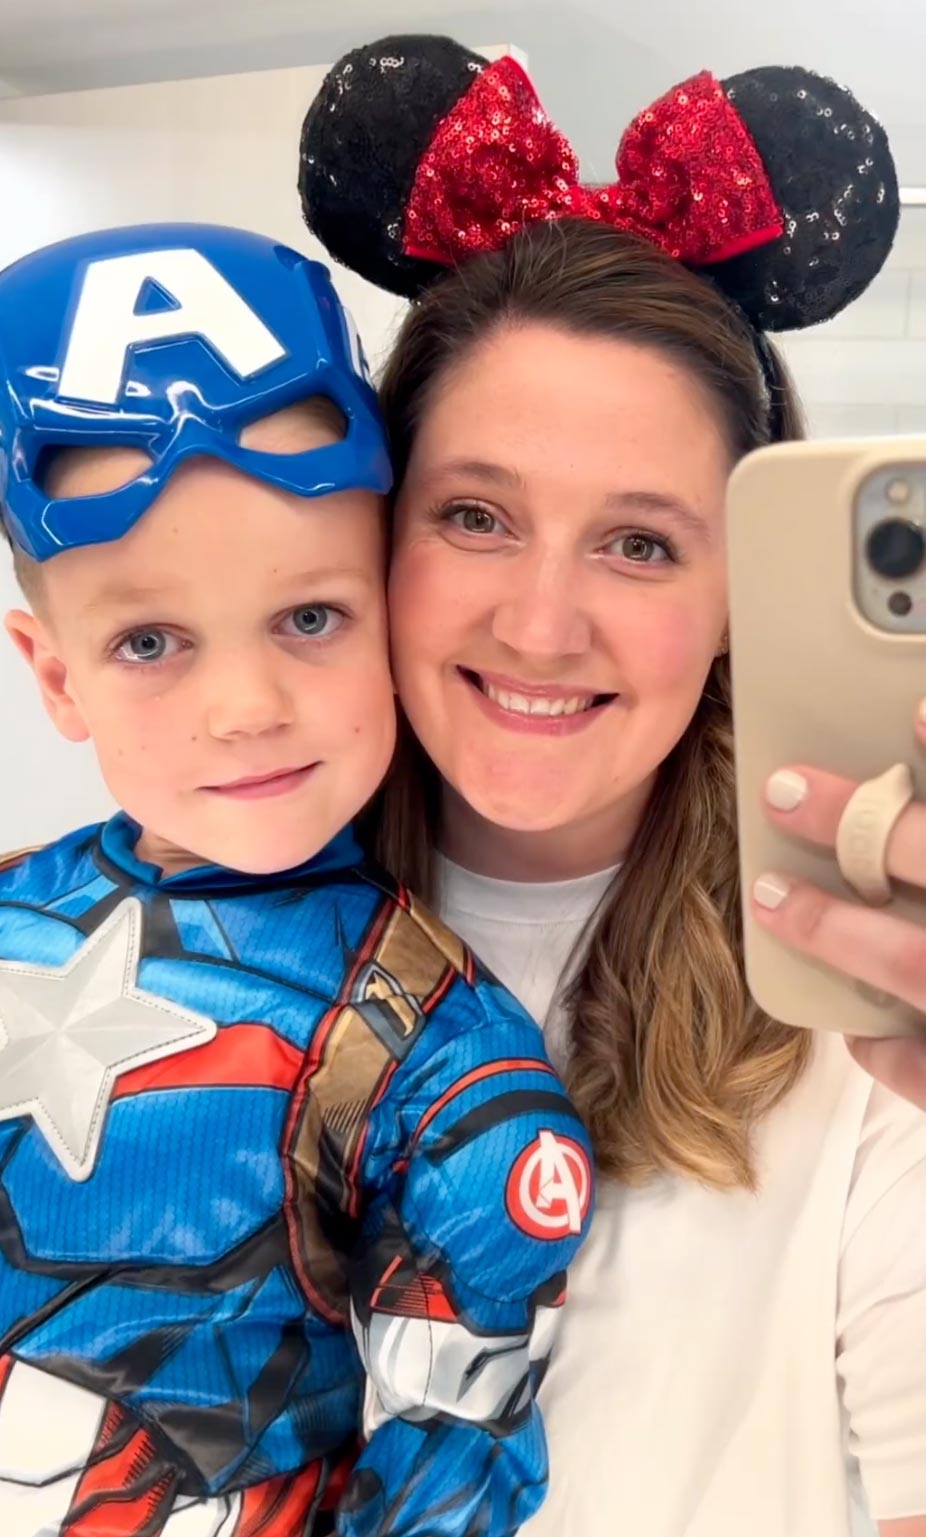 Tori Roloff ‘Loved Spending 1 on 1 Time’ With Son Jackson During Disneyland Getaway